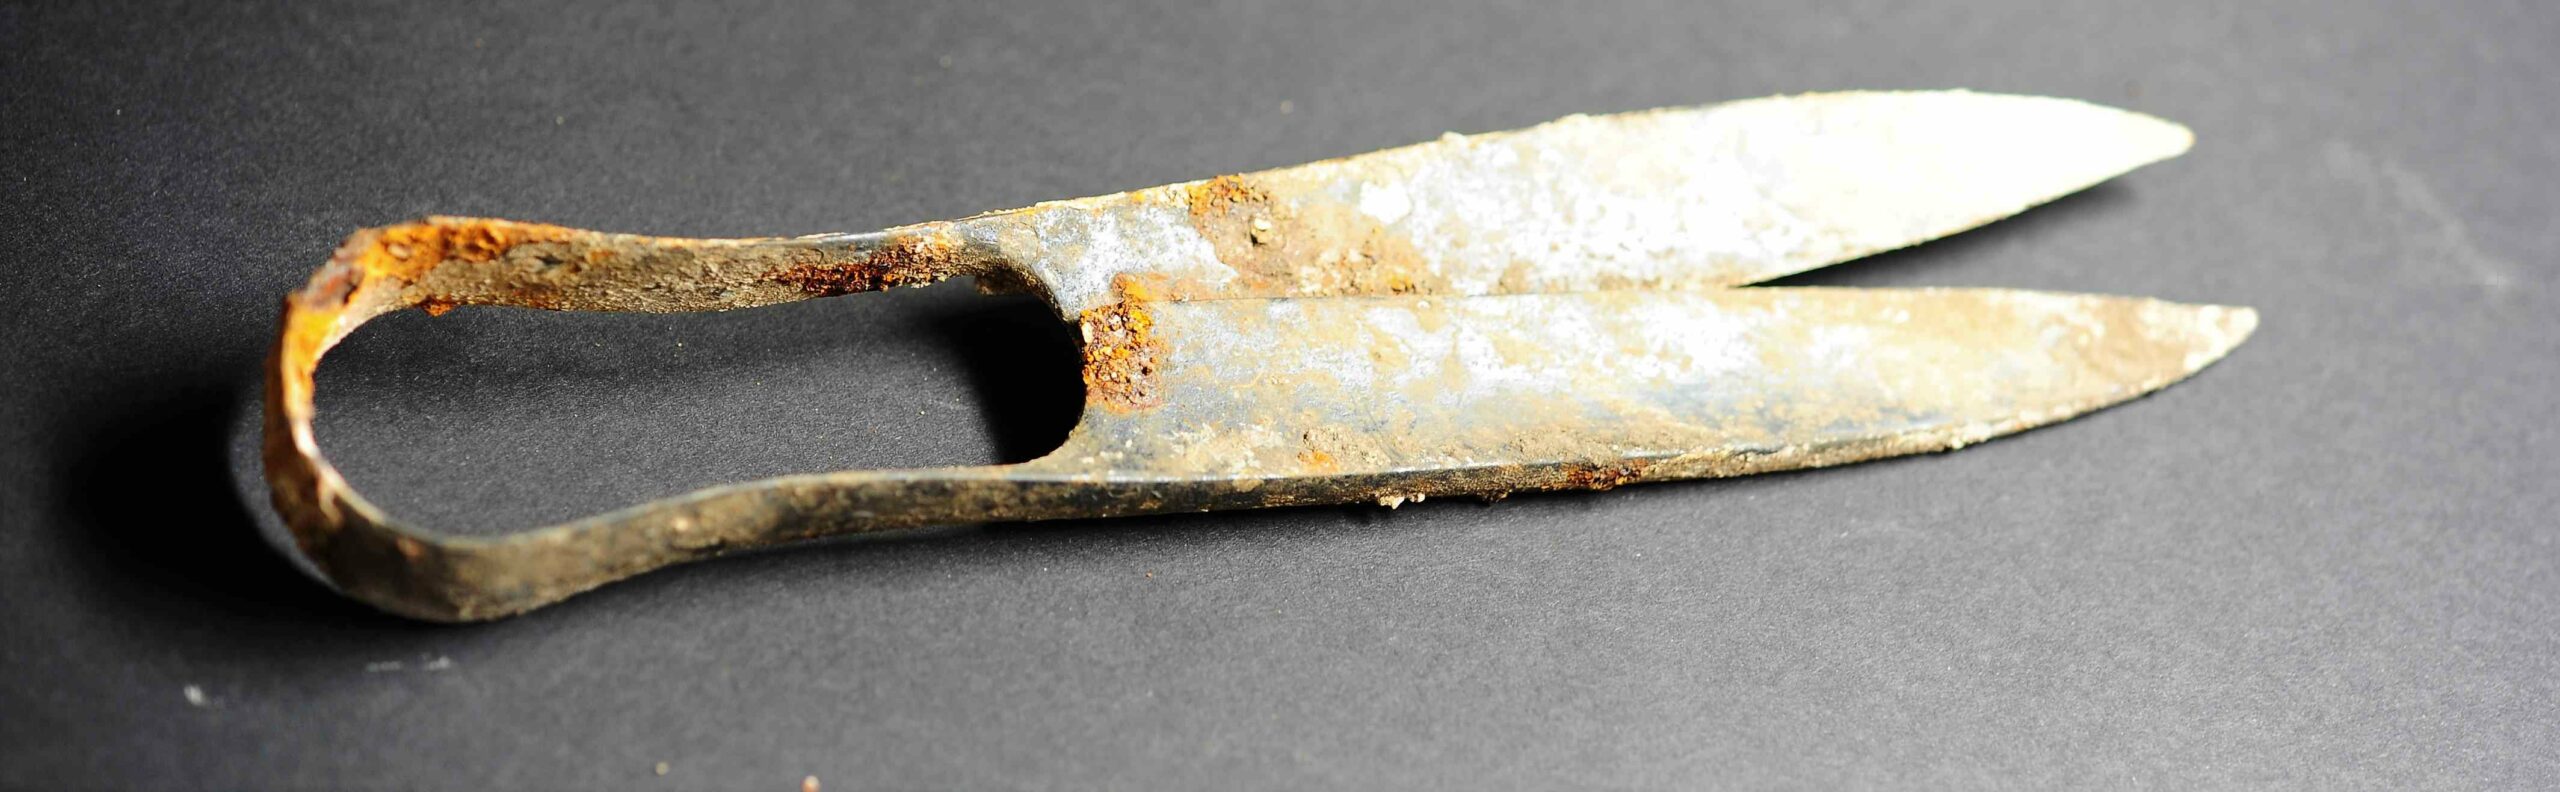 2,300-year-old scissors and a 'folded' sword discovered in a Celtic cremation tomb in Germany 2